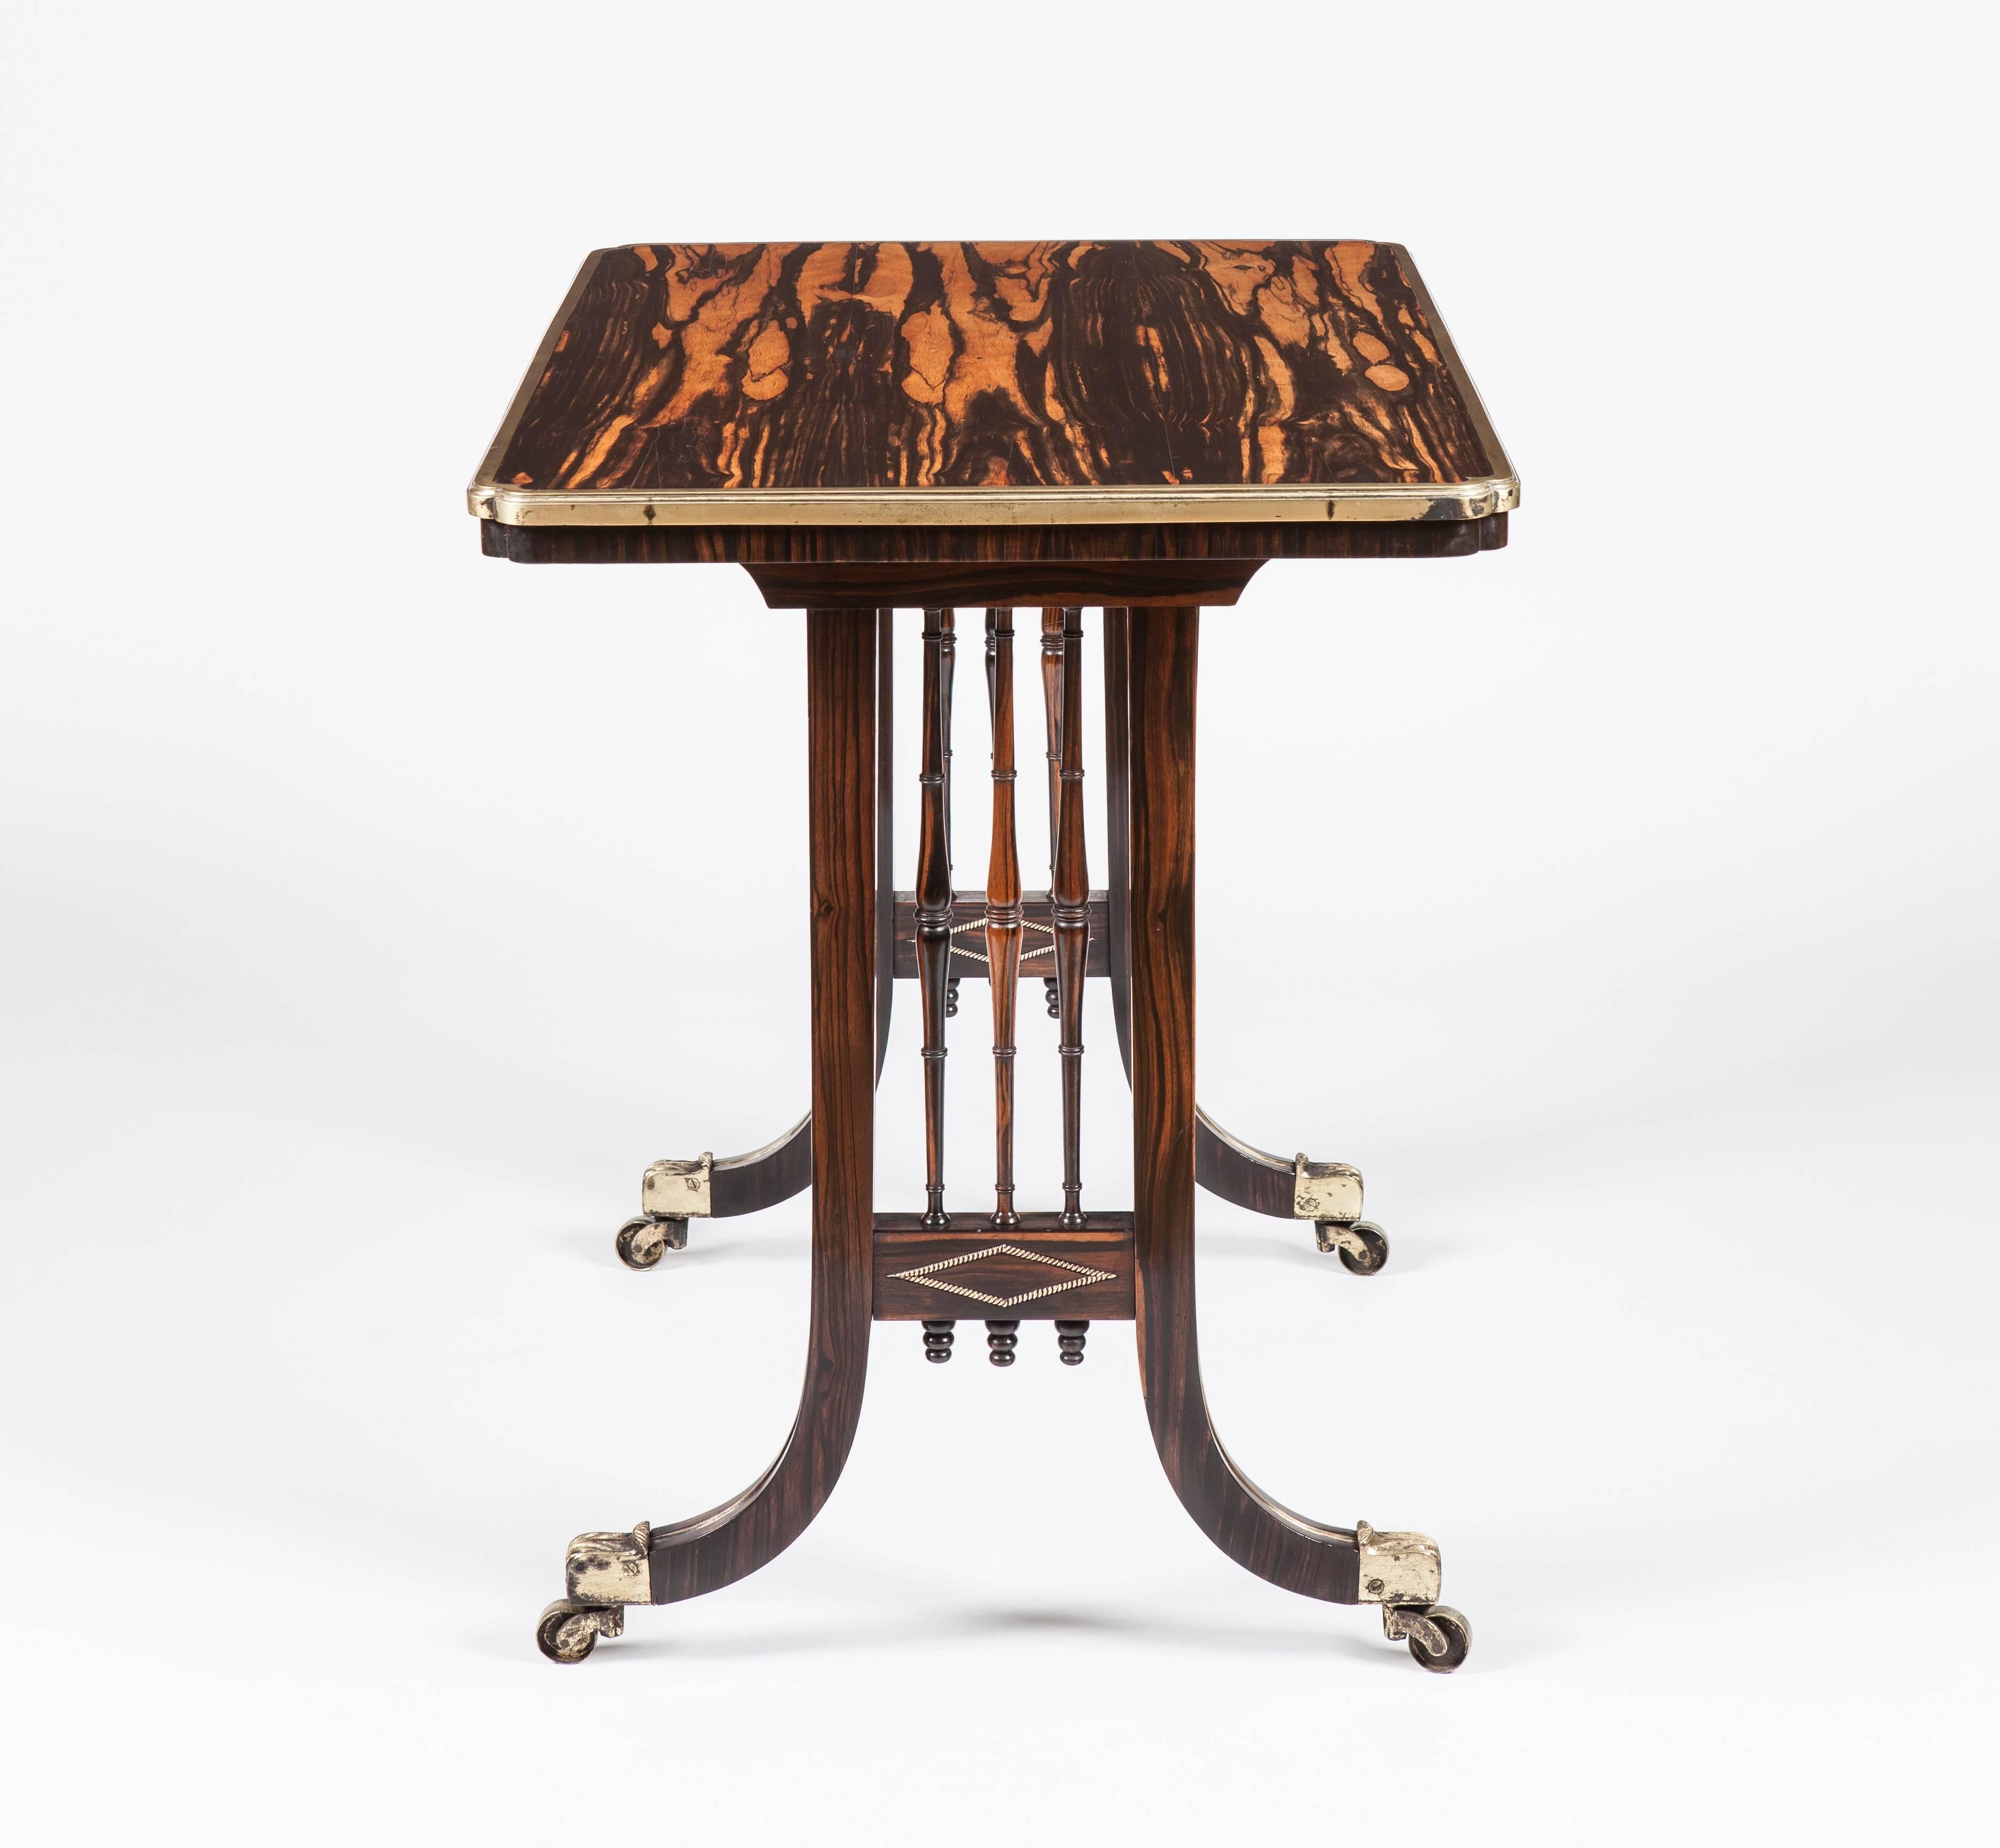 A splendid Regency table firmly attributed to Gillow
with provenance to the Marchioness Dowager of Bath
 
Constructed in a beautifully marked coromandel: rising from bronze caster shod swept reeded legs, the ends housing vertical frames enclosing